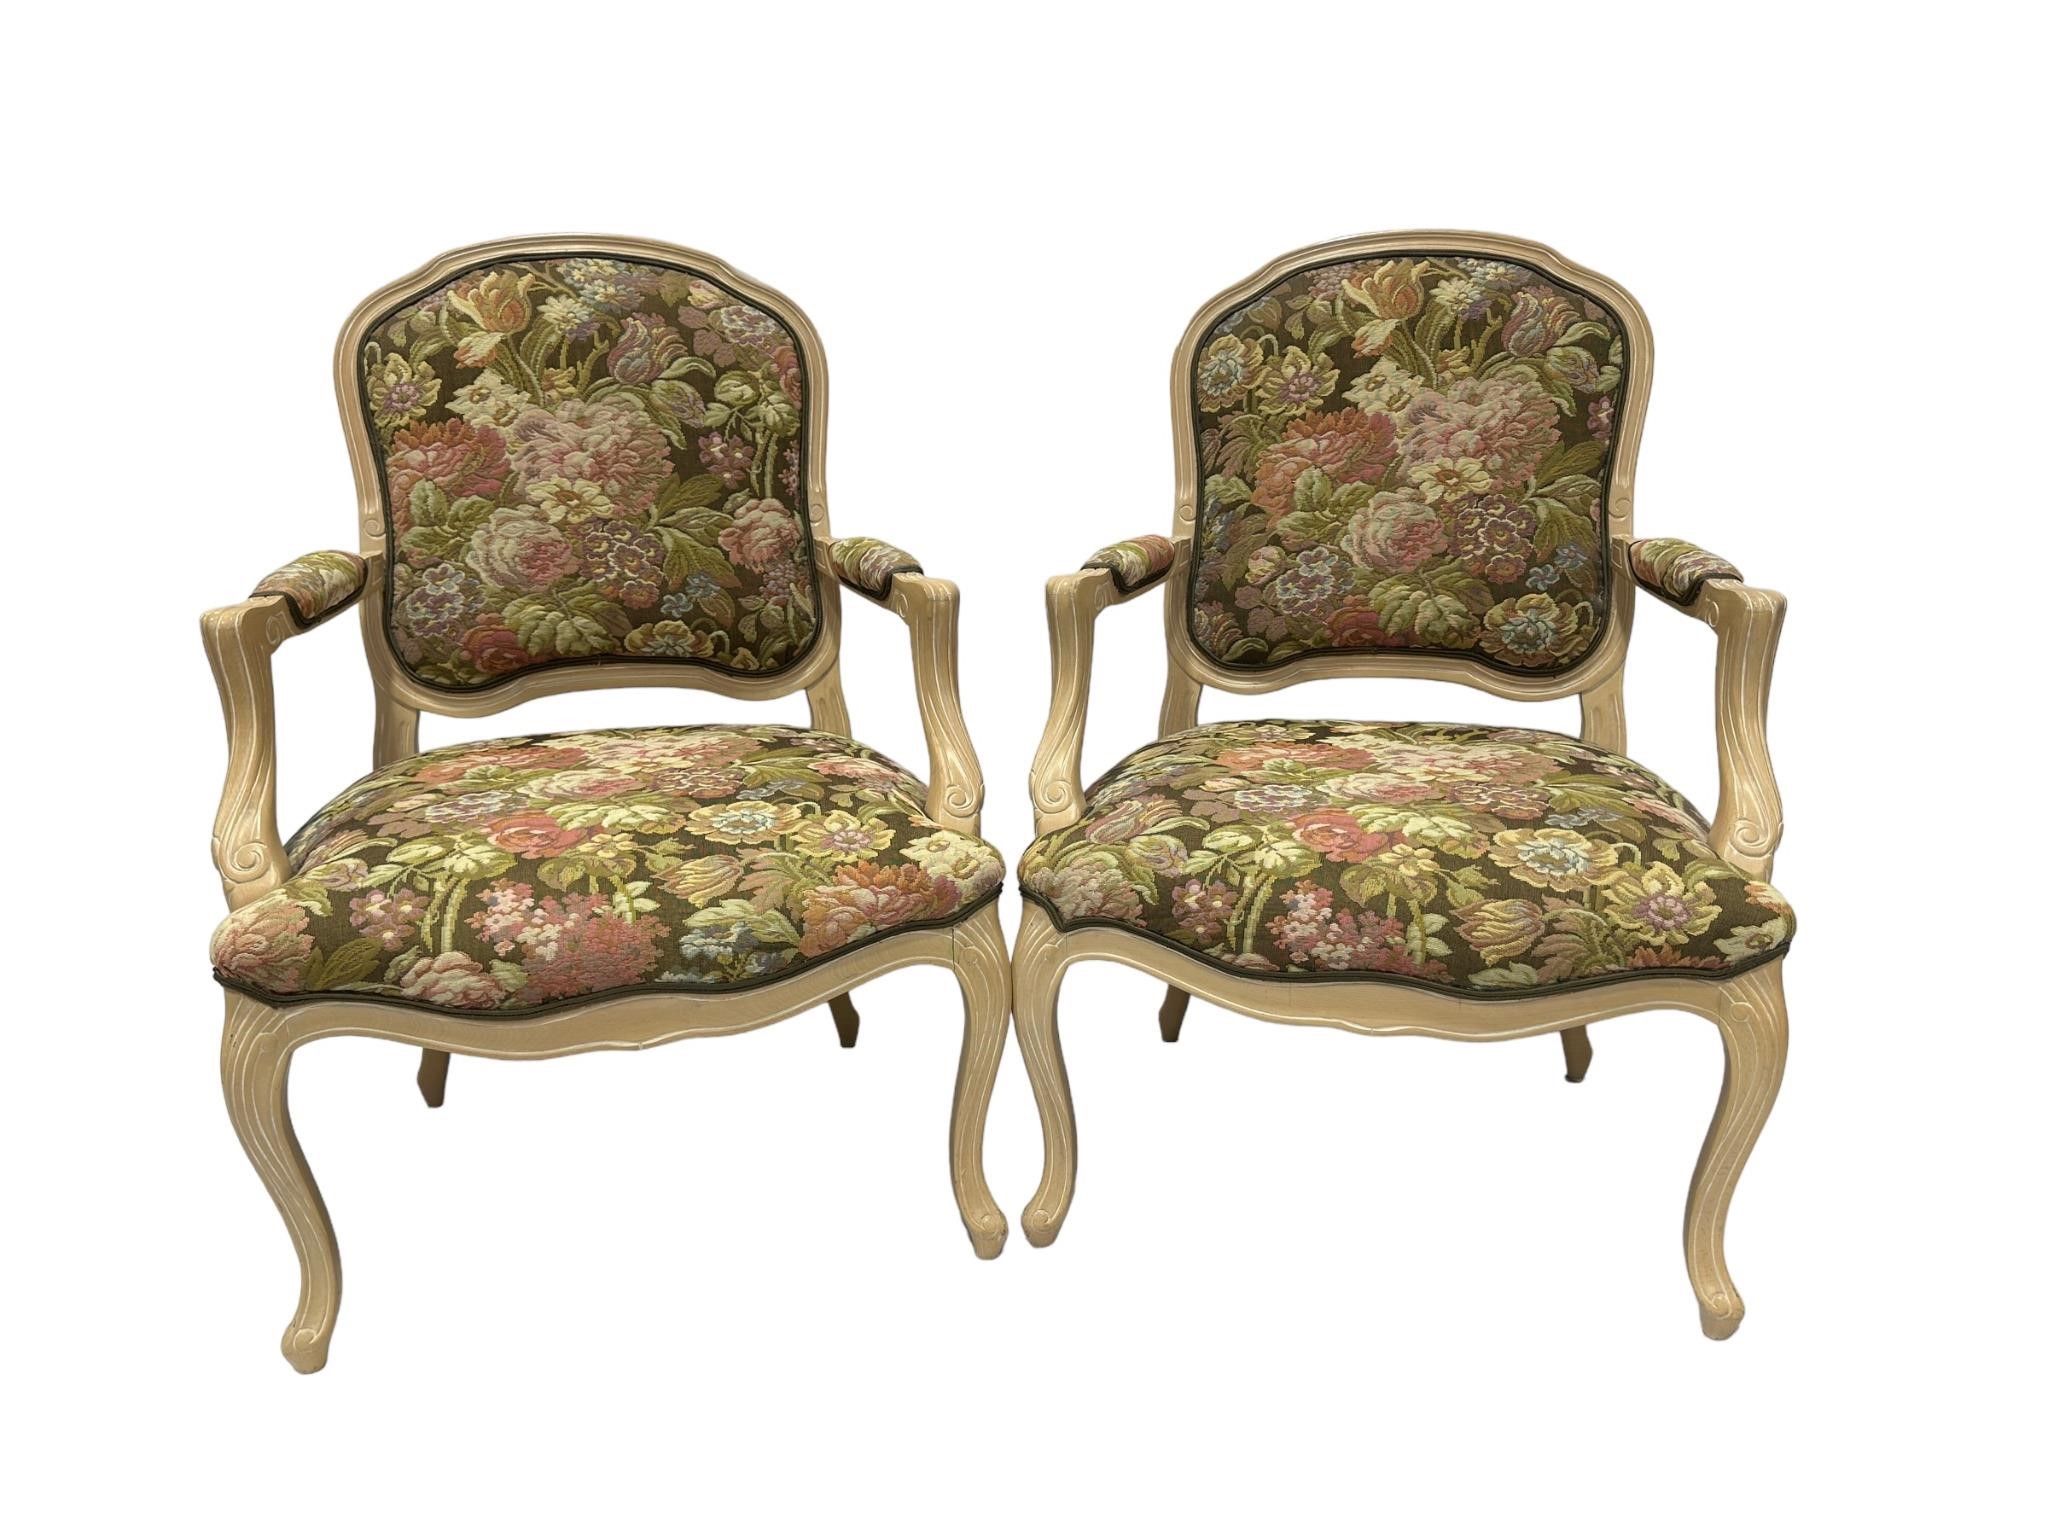 Pair of French Provincial Style Arm Chairs